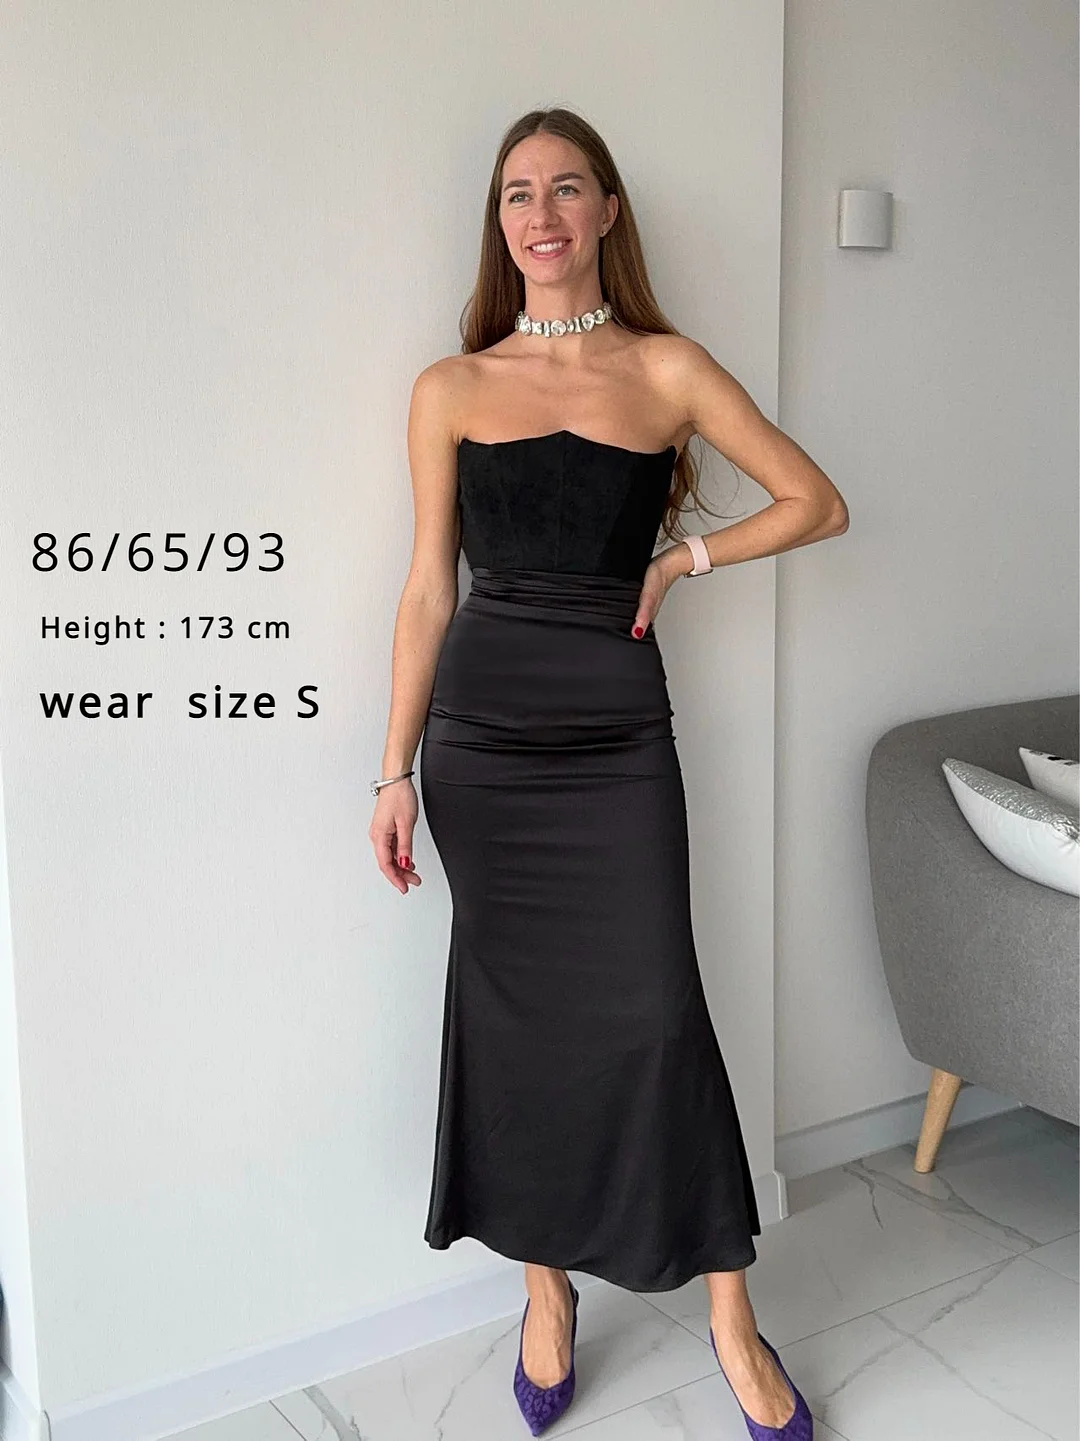 Colourp Maxi Strapless Formal Occasion Dresses Elegant Bodycon Corset Party Dresses Sexy Velvet and Satin Patchwork Dress